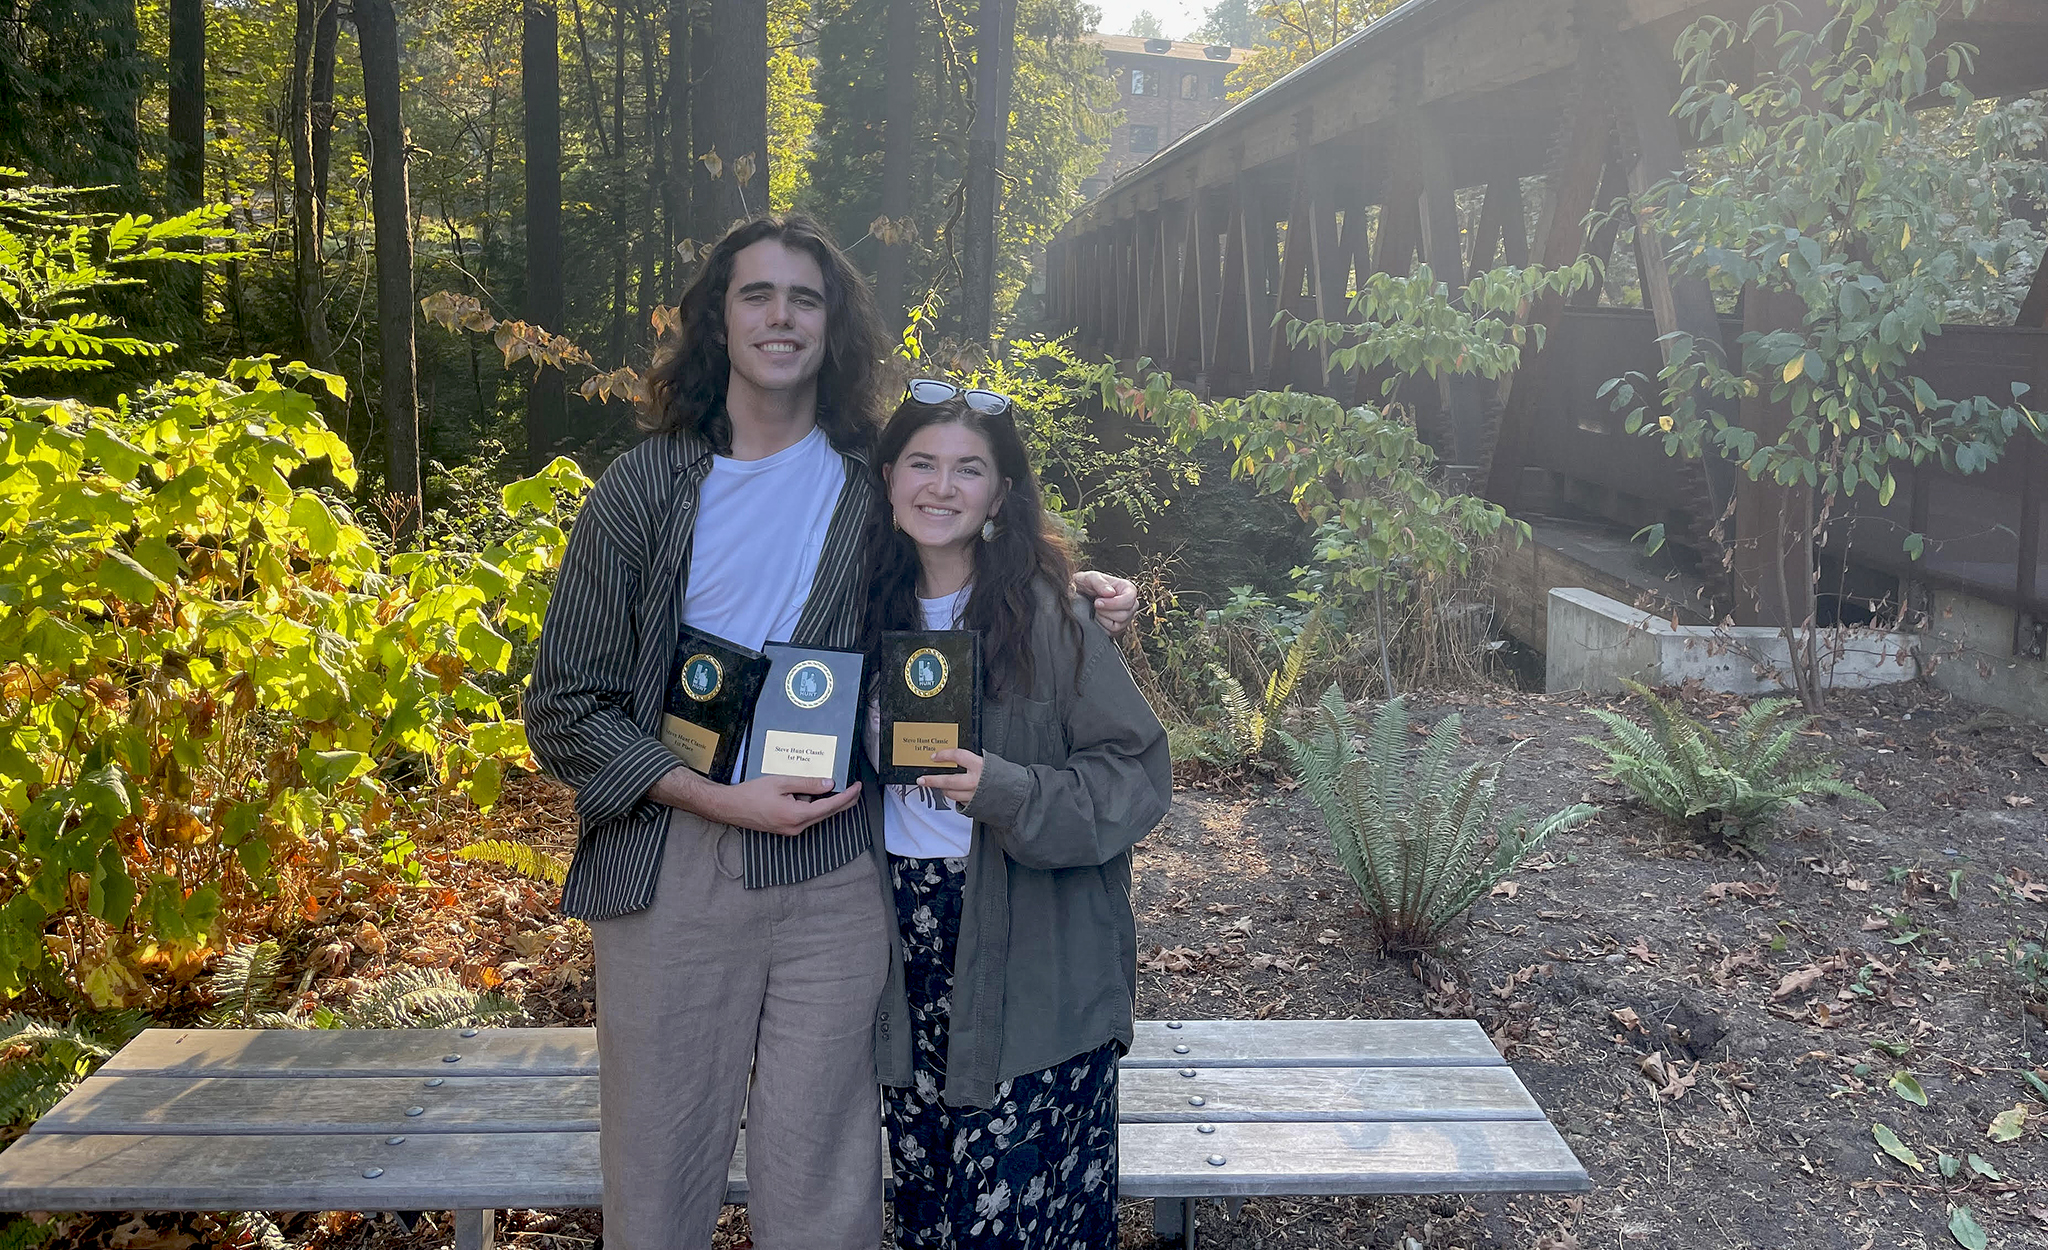 UM students Spencer Heitman (left) and Katherine Broten show off their awards from the national championship debate tournament hosted by Lewis & Clark College. Heitman and Broten, both members of the UM Warren Debate Union, finished first overall in the competition. Submitted photo